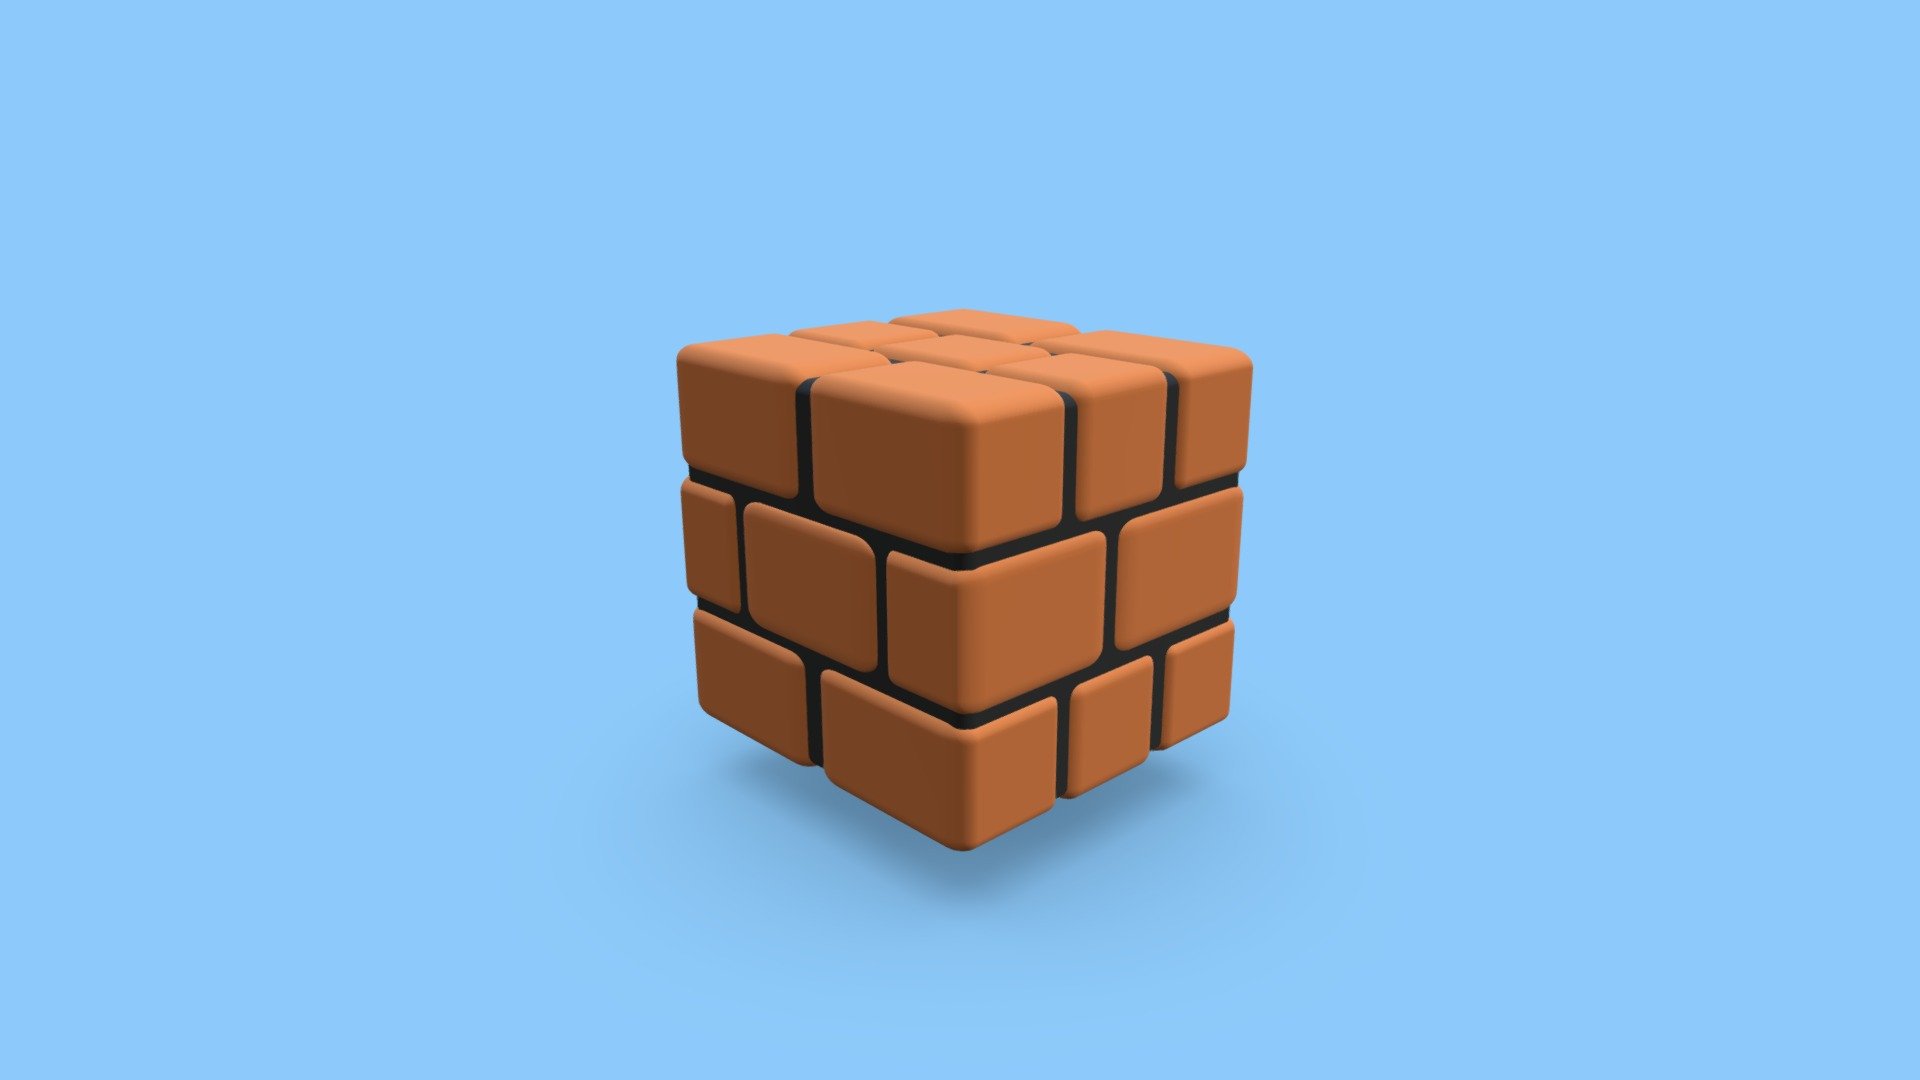 Mario block using Mario 3D world as inspiration.

I appreciate all good and bad feedback, im just starting out in the blender world and everything is a learning oppurtunity.

I will be uploading regularly so make sure to check back in! - Mario Block - Download Free 3D model by DerrenGoneDigital 3d model